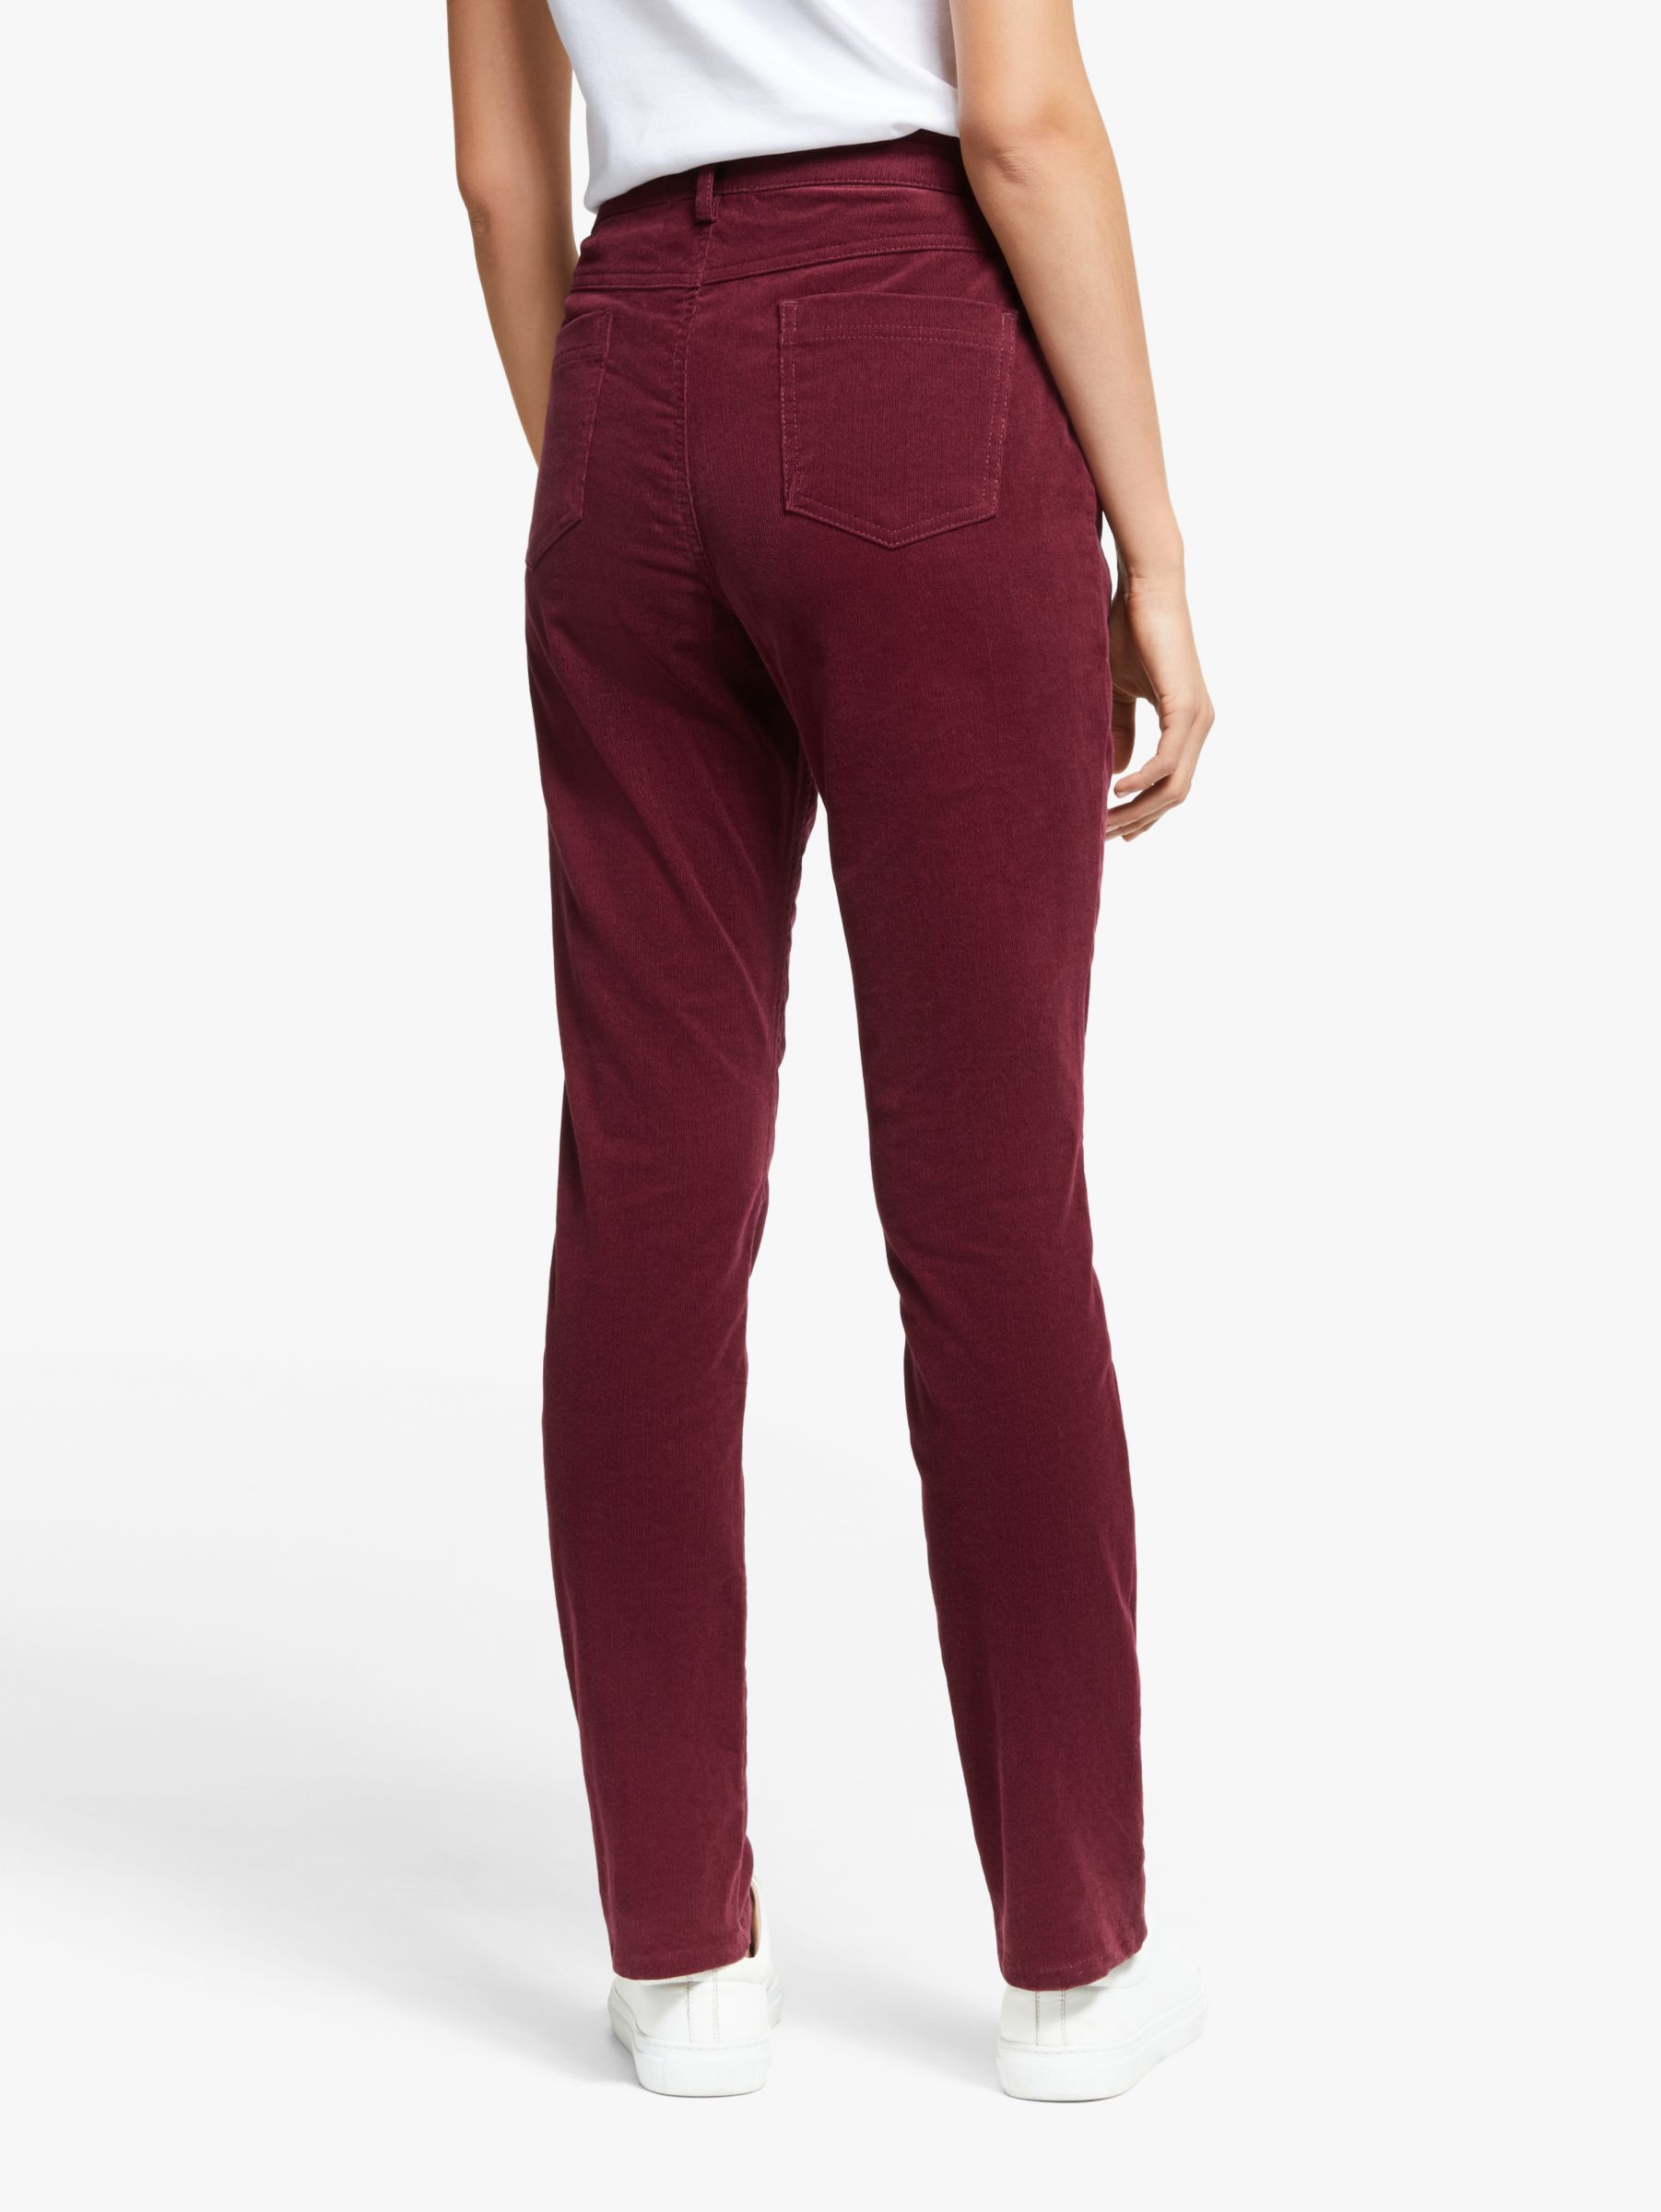 Collection WEEKEND by John Lewis Slim Cord Trousers, Burgundy at John ...